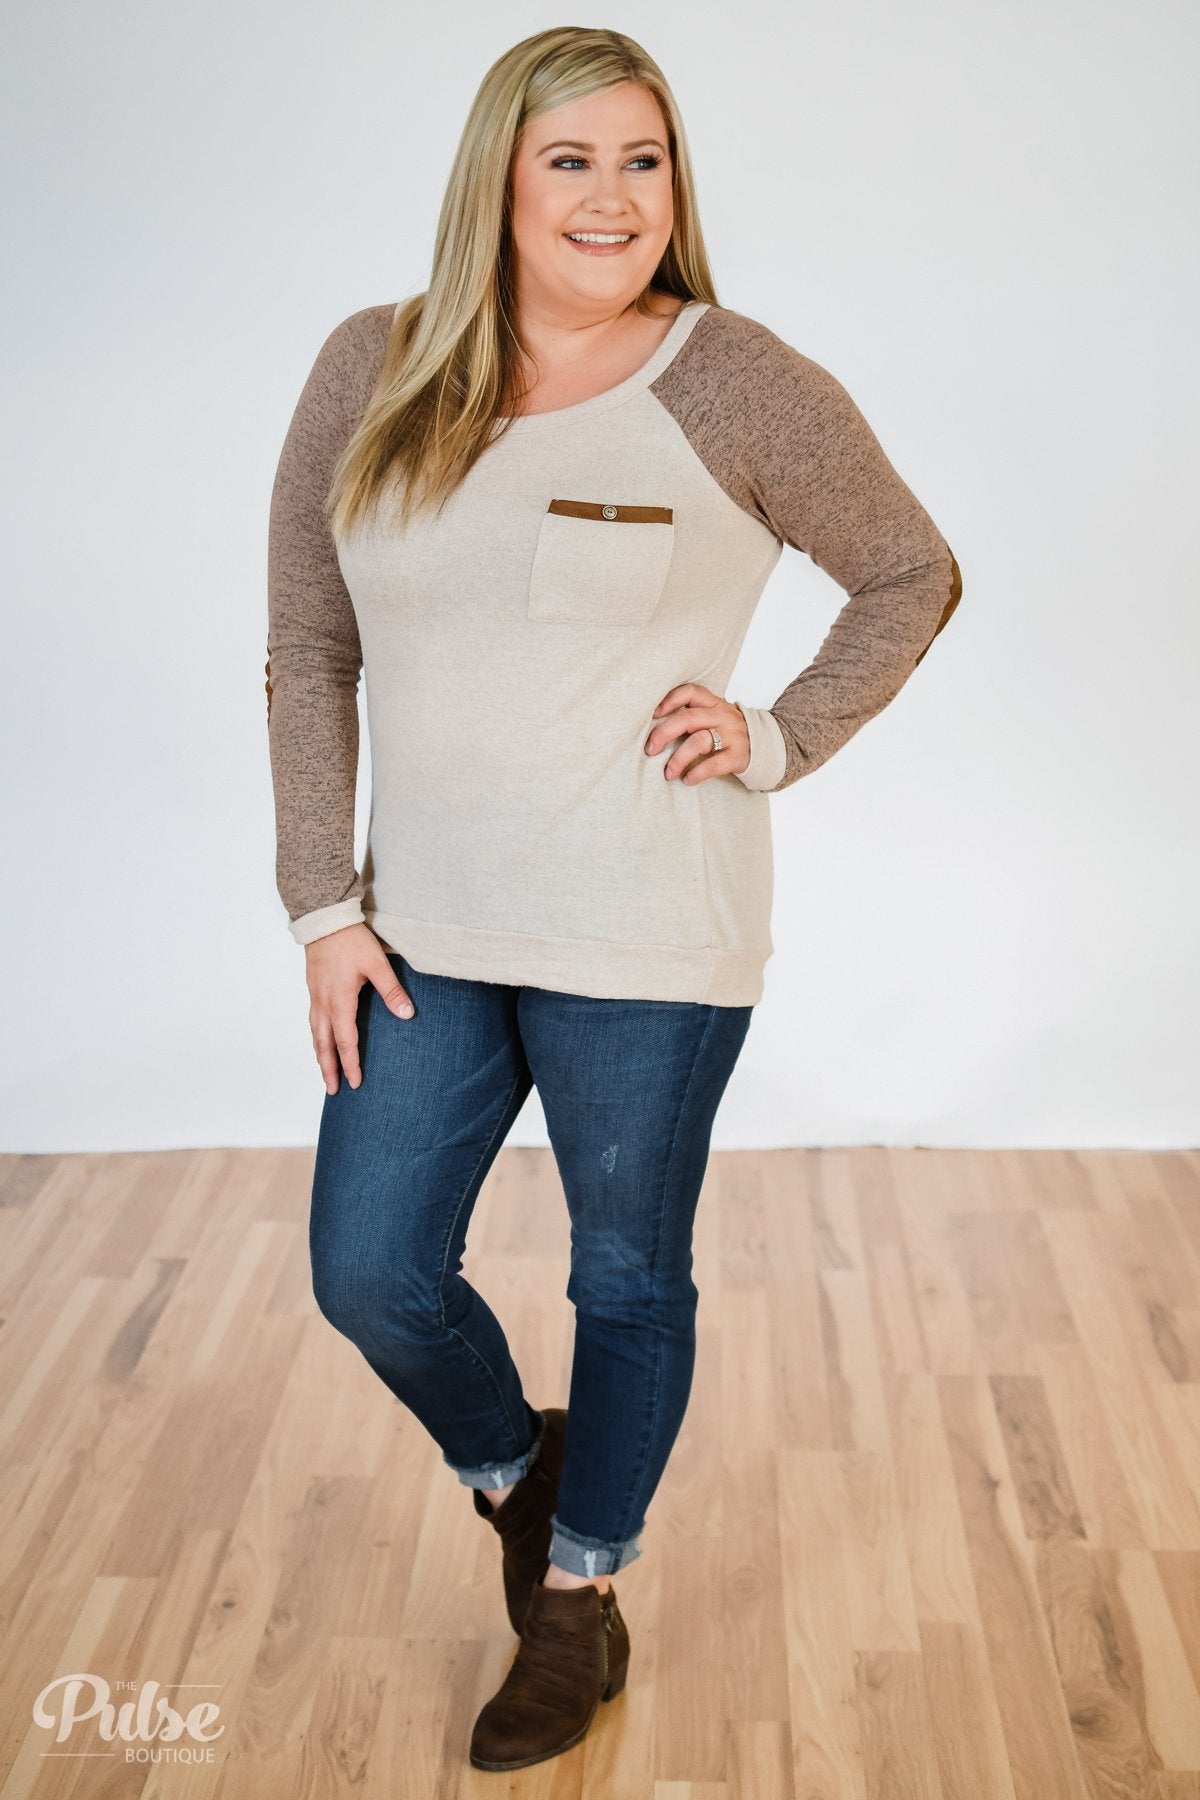 Compass To You Elbow Patch Top- Oatmeal & Mocha